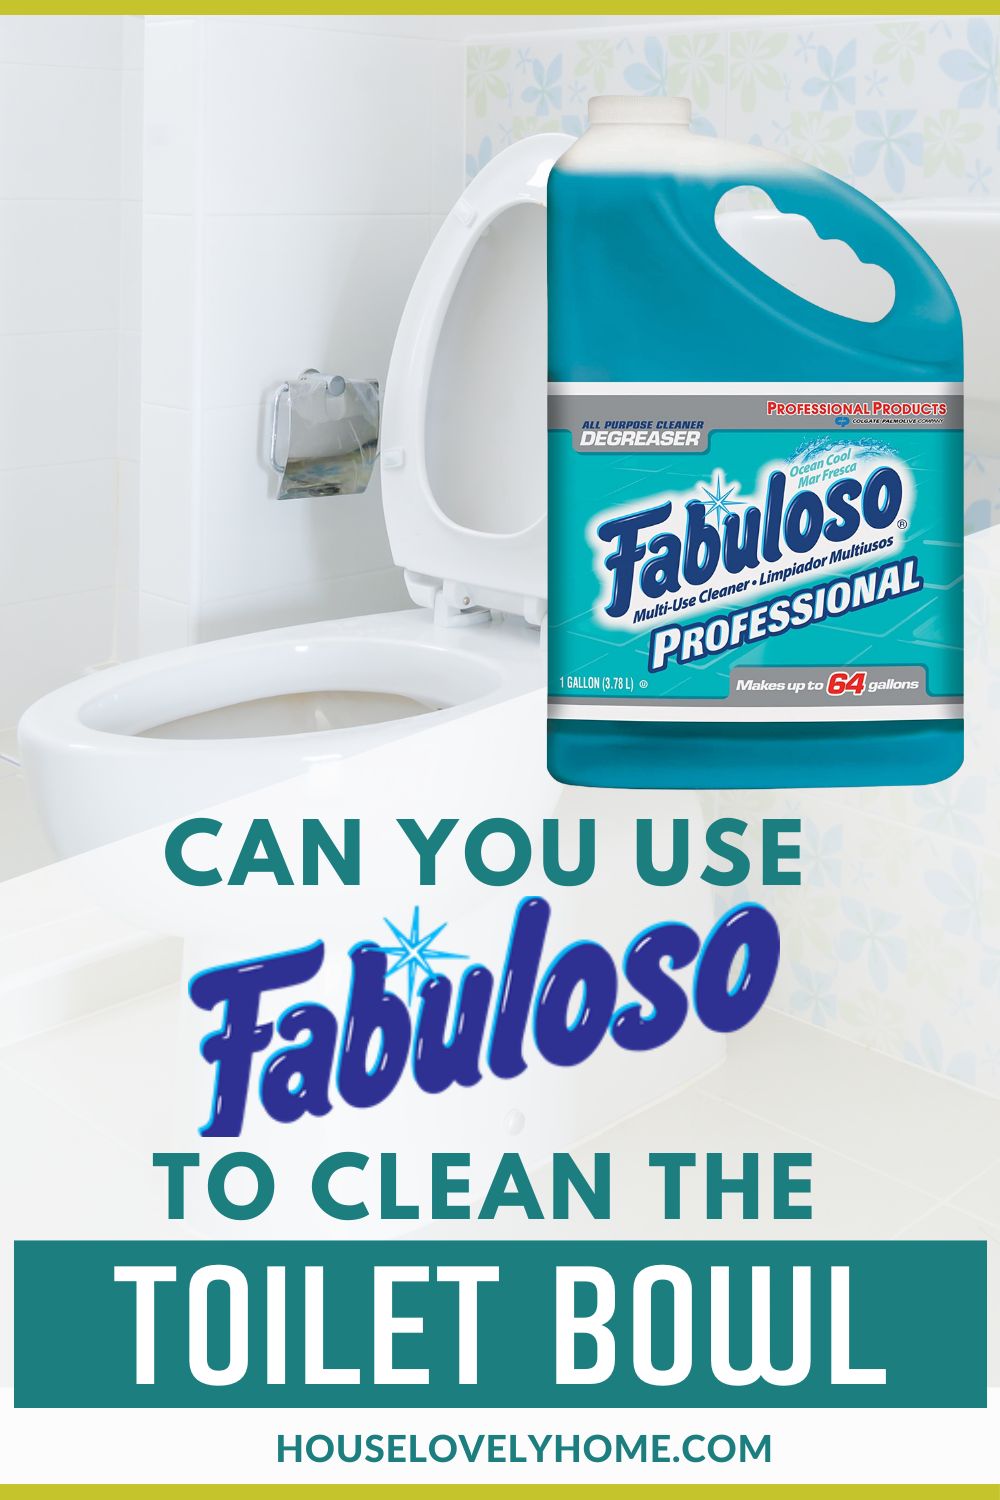 Photo showing the image of a toilet bowl, a gallon of fabuloso and text overlay that reads Can you use Fabuloso to clean the toilet bowl